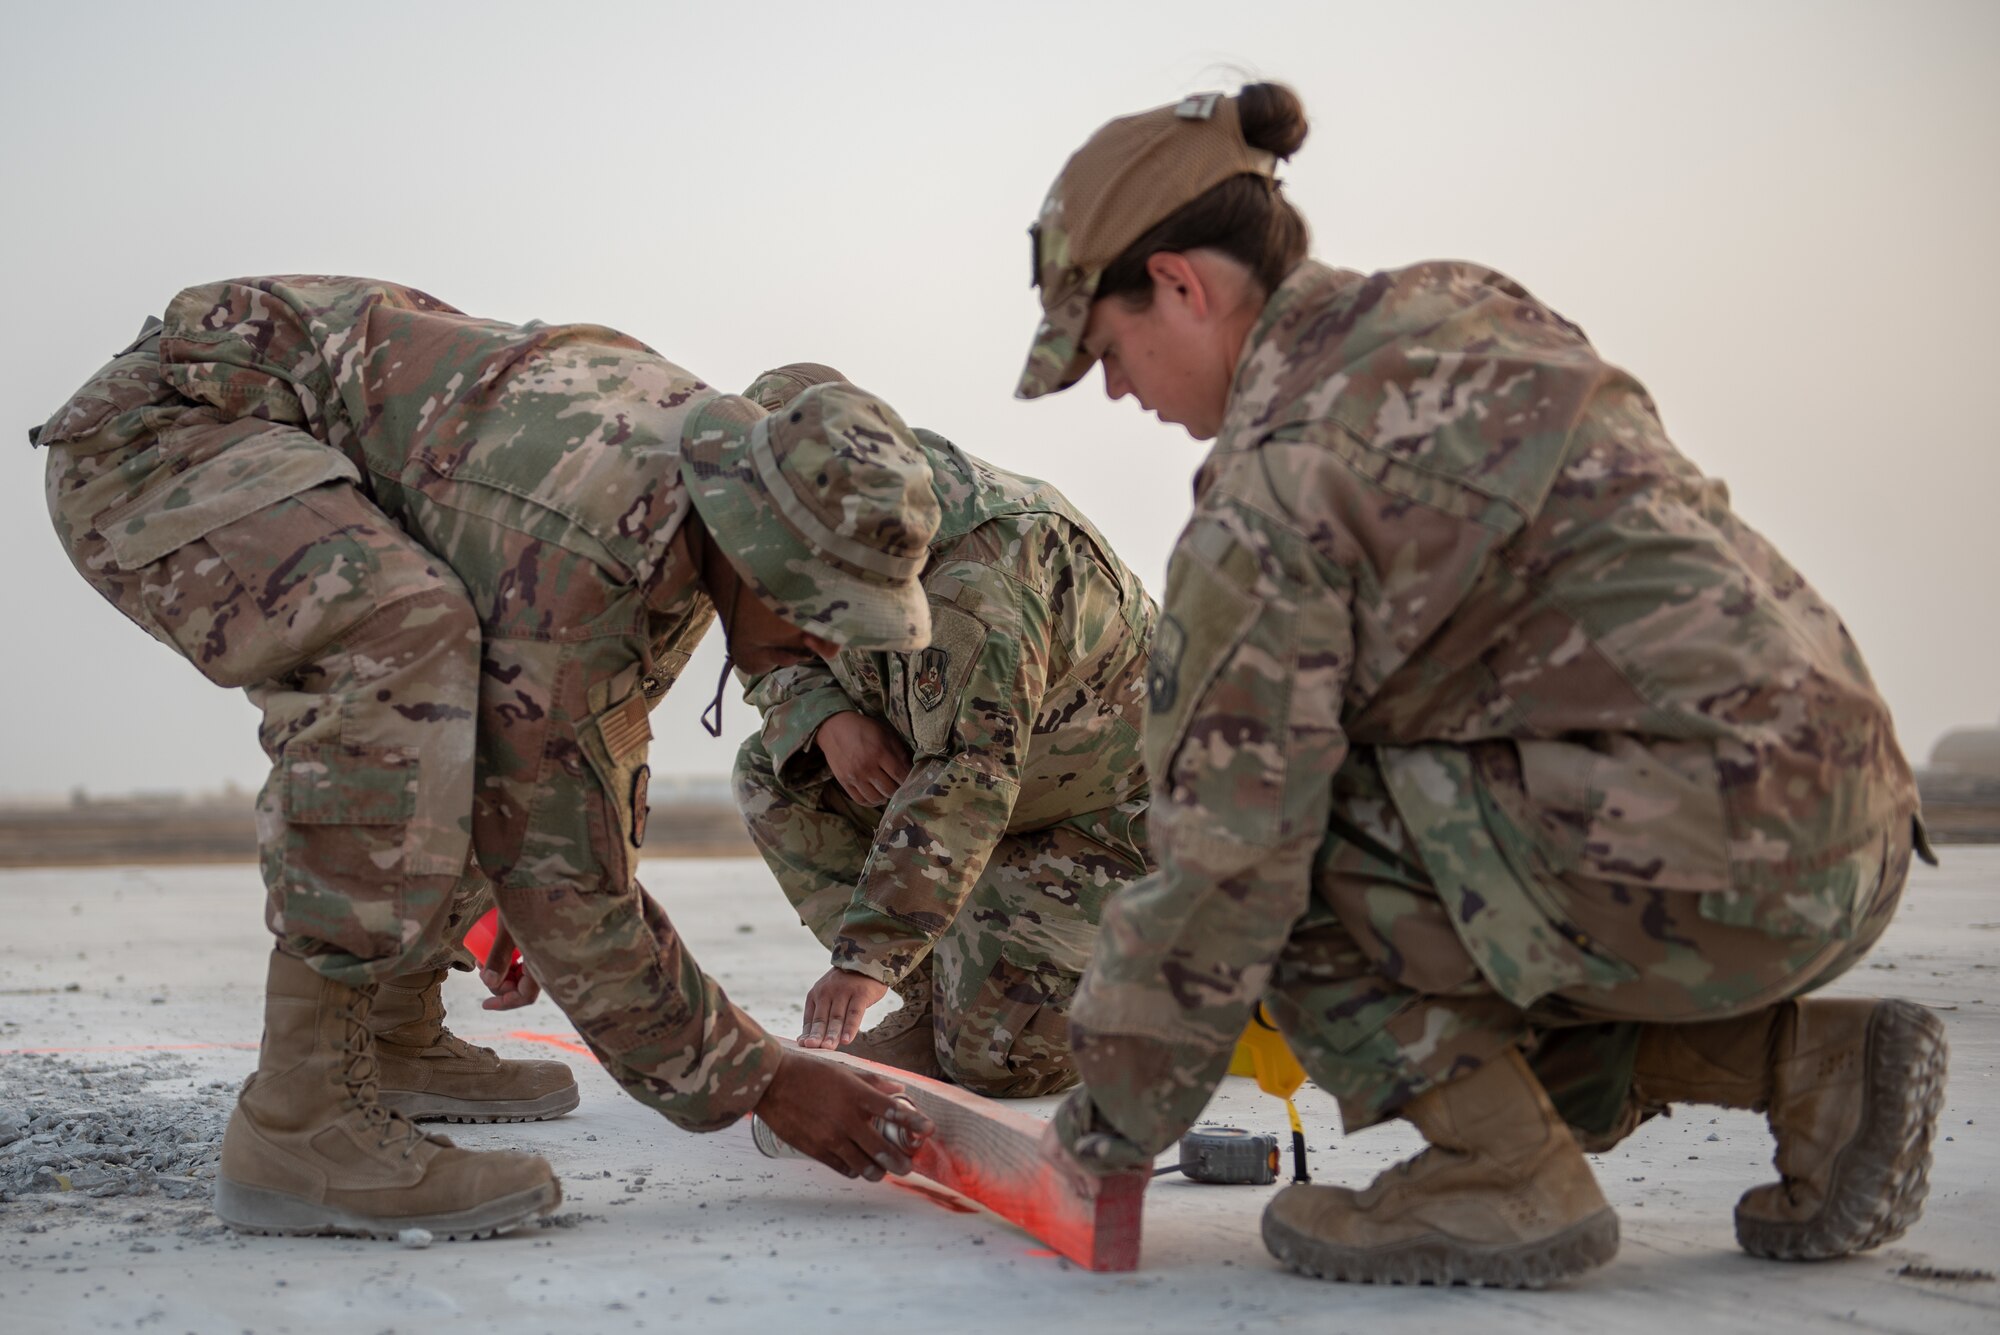 Two 380th Expeditionary Civil Engineer Squadron water and fuels technicians mark lines on concrete during a rapid airfield damage repair exercise July 26, 2019, at Al Dhafra Air Base, United Arab Emirates. By removing damaged areas of concrete it can be replaced with fast-curing concrete to get the airfield operational quickly and efficiently. (U.S. Air Force photo by Staff Sgt. Chris Thornbury)